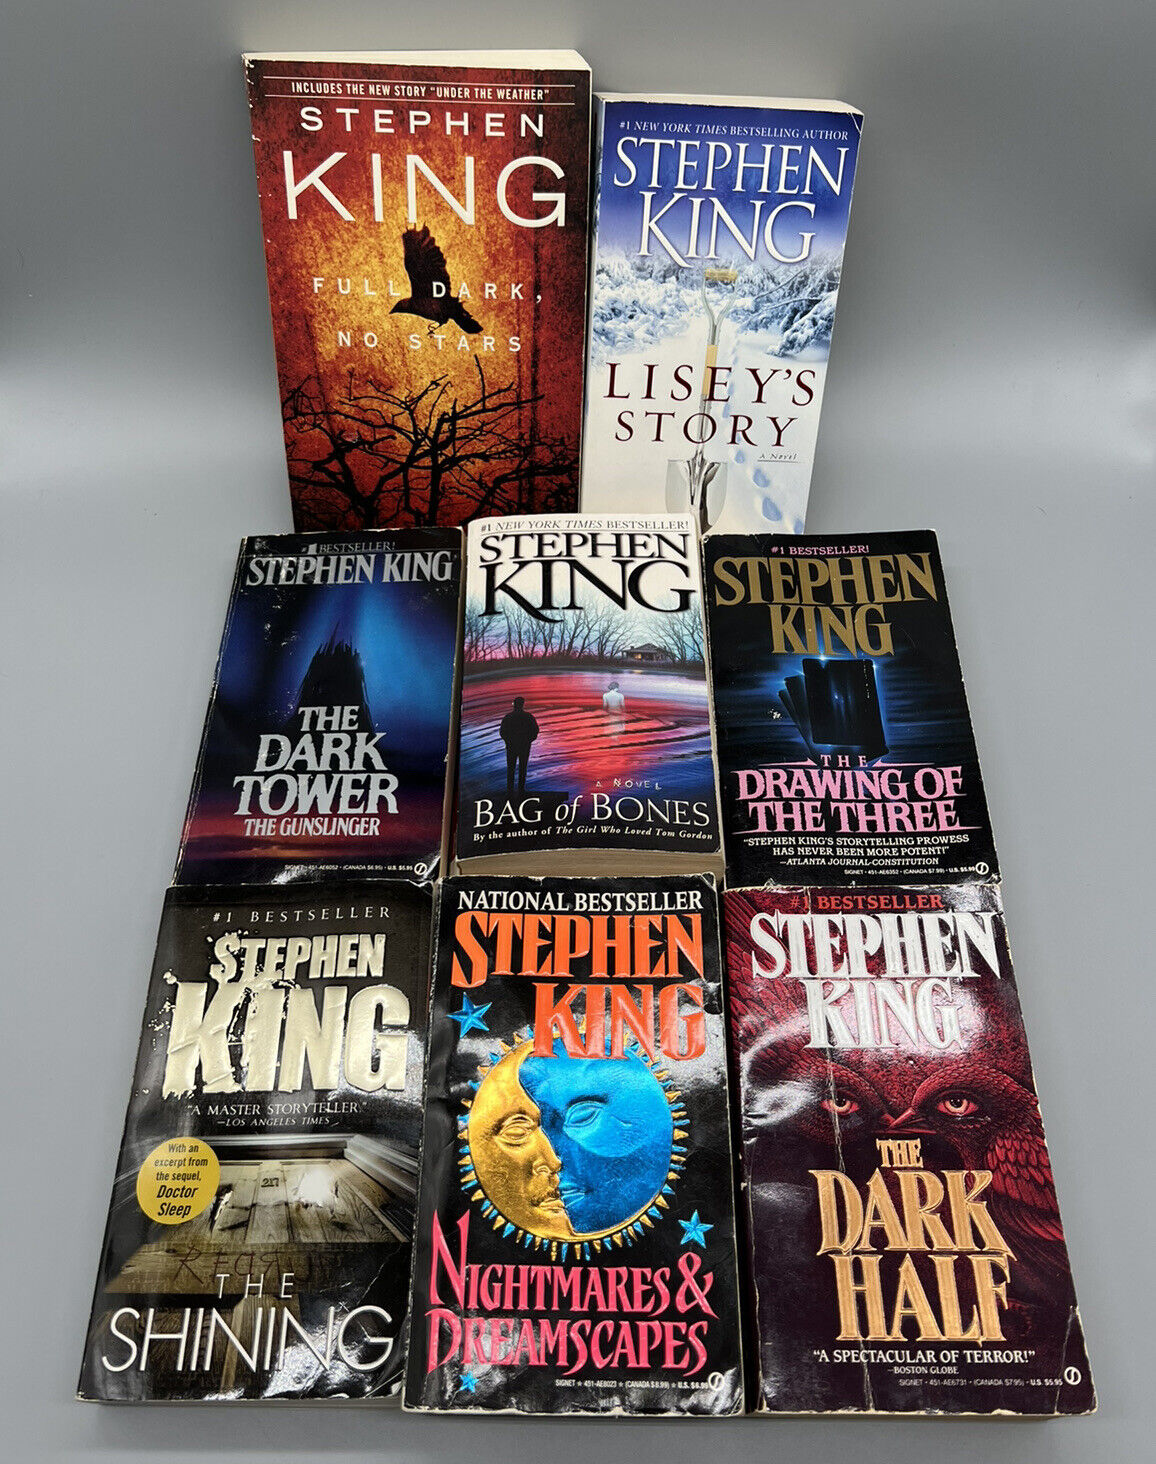 Stephen King's Books: A Perfect Blend of Horror, Suspense, and Character Development